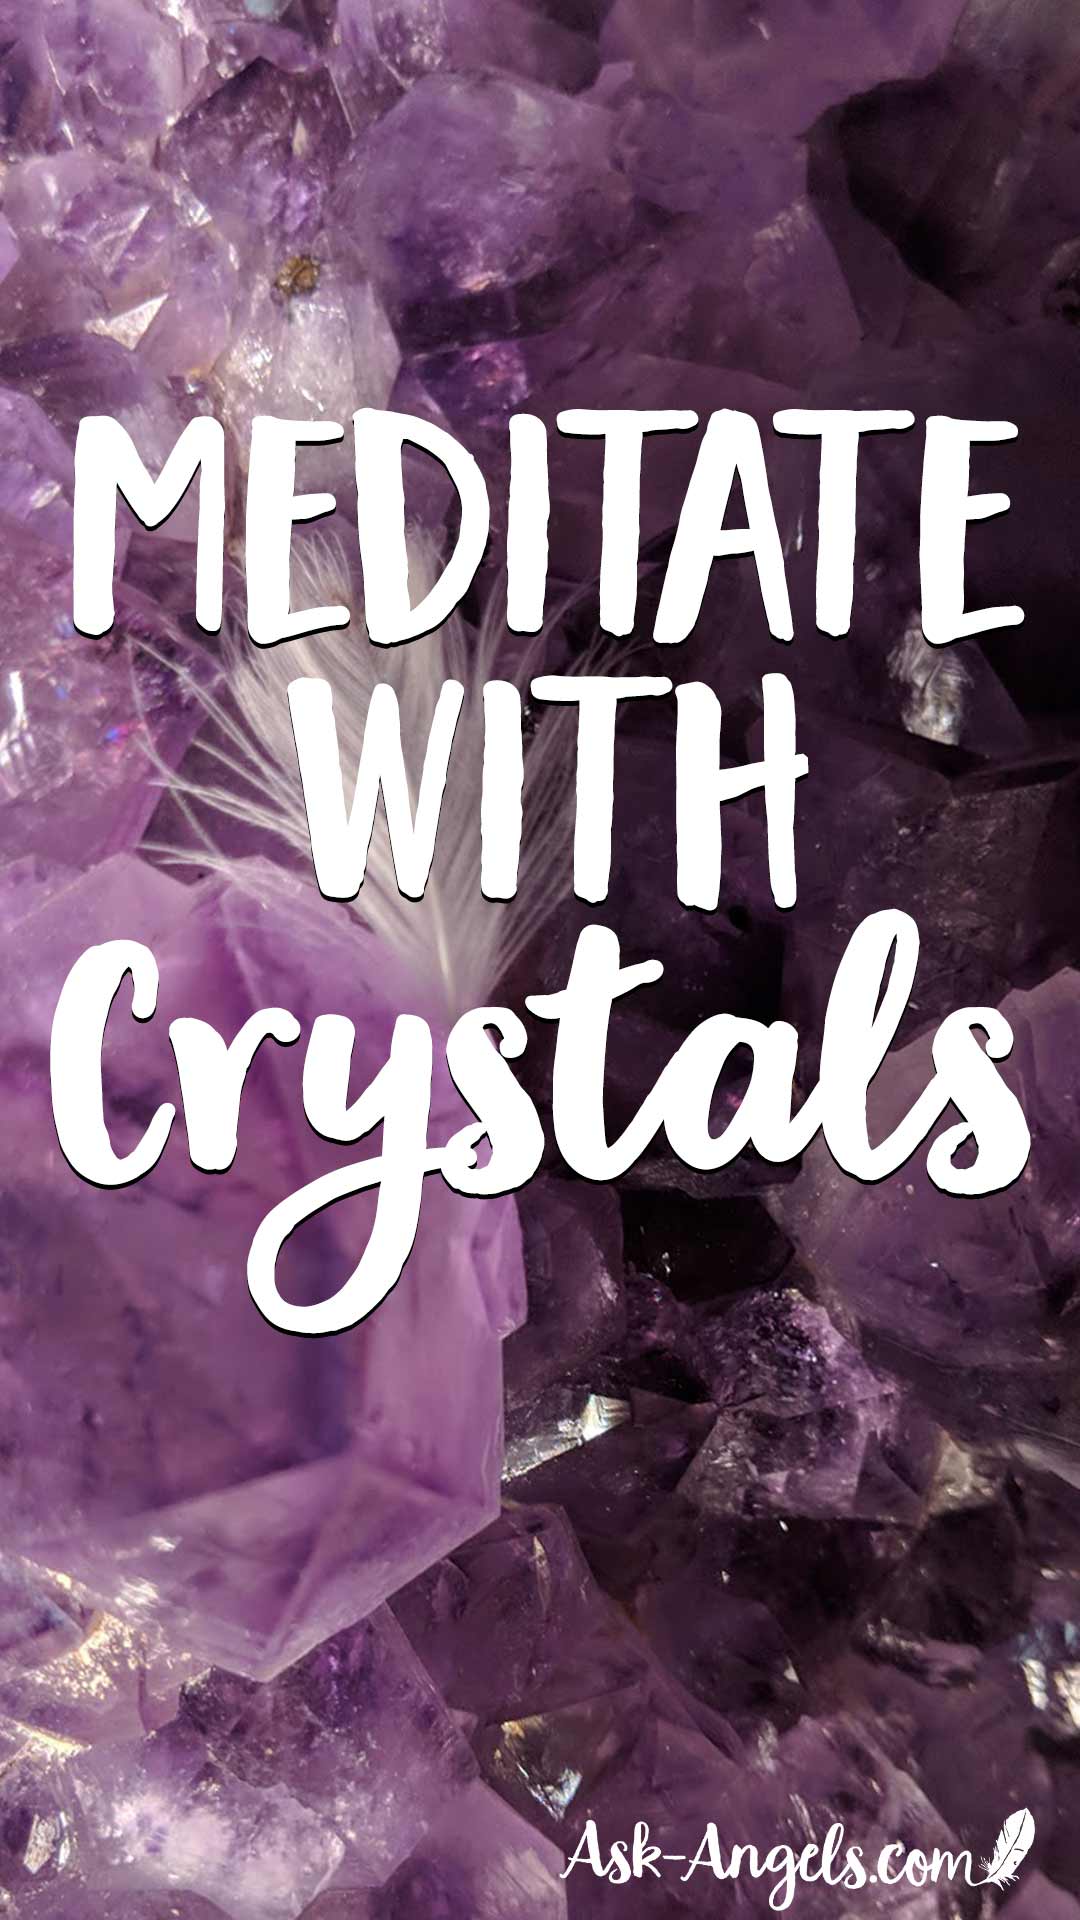 Meditate with Crystals